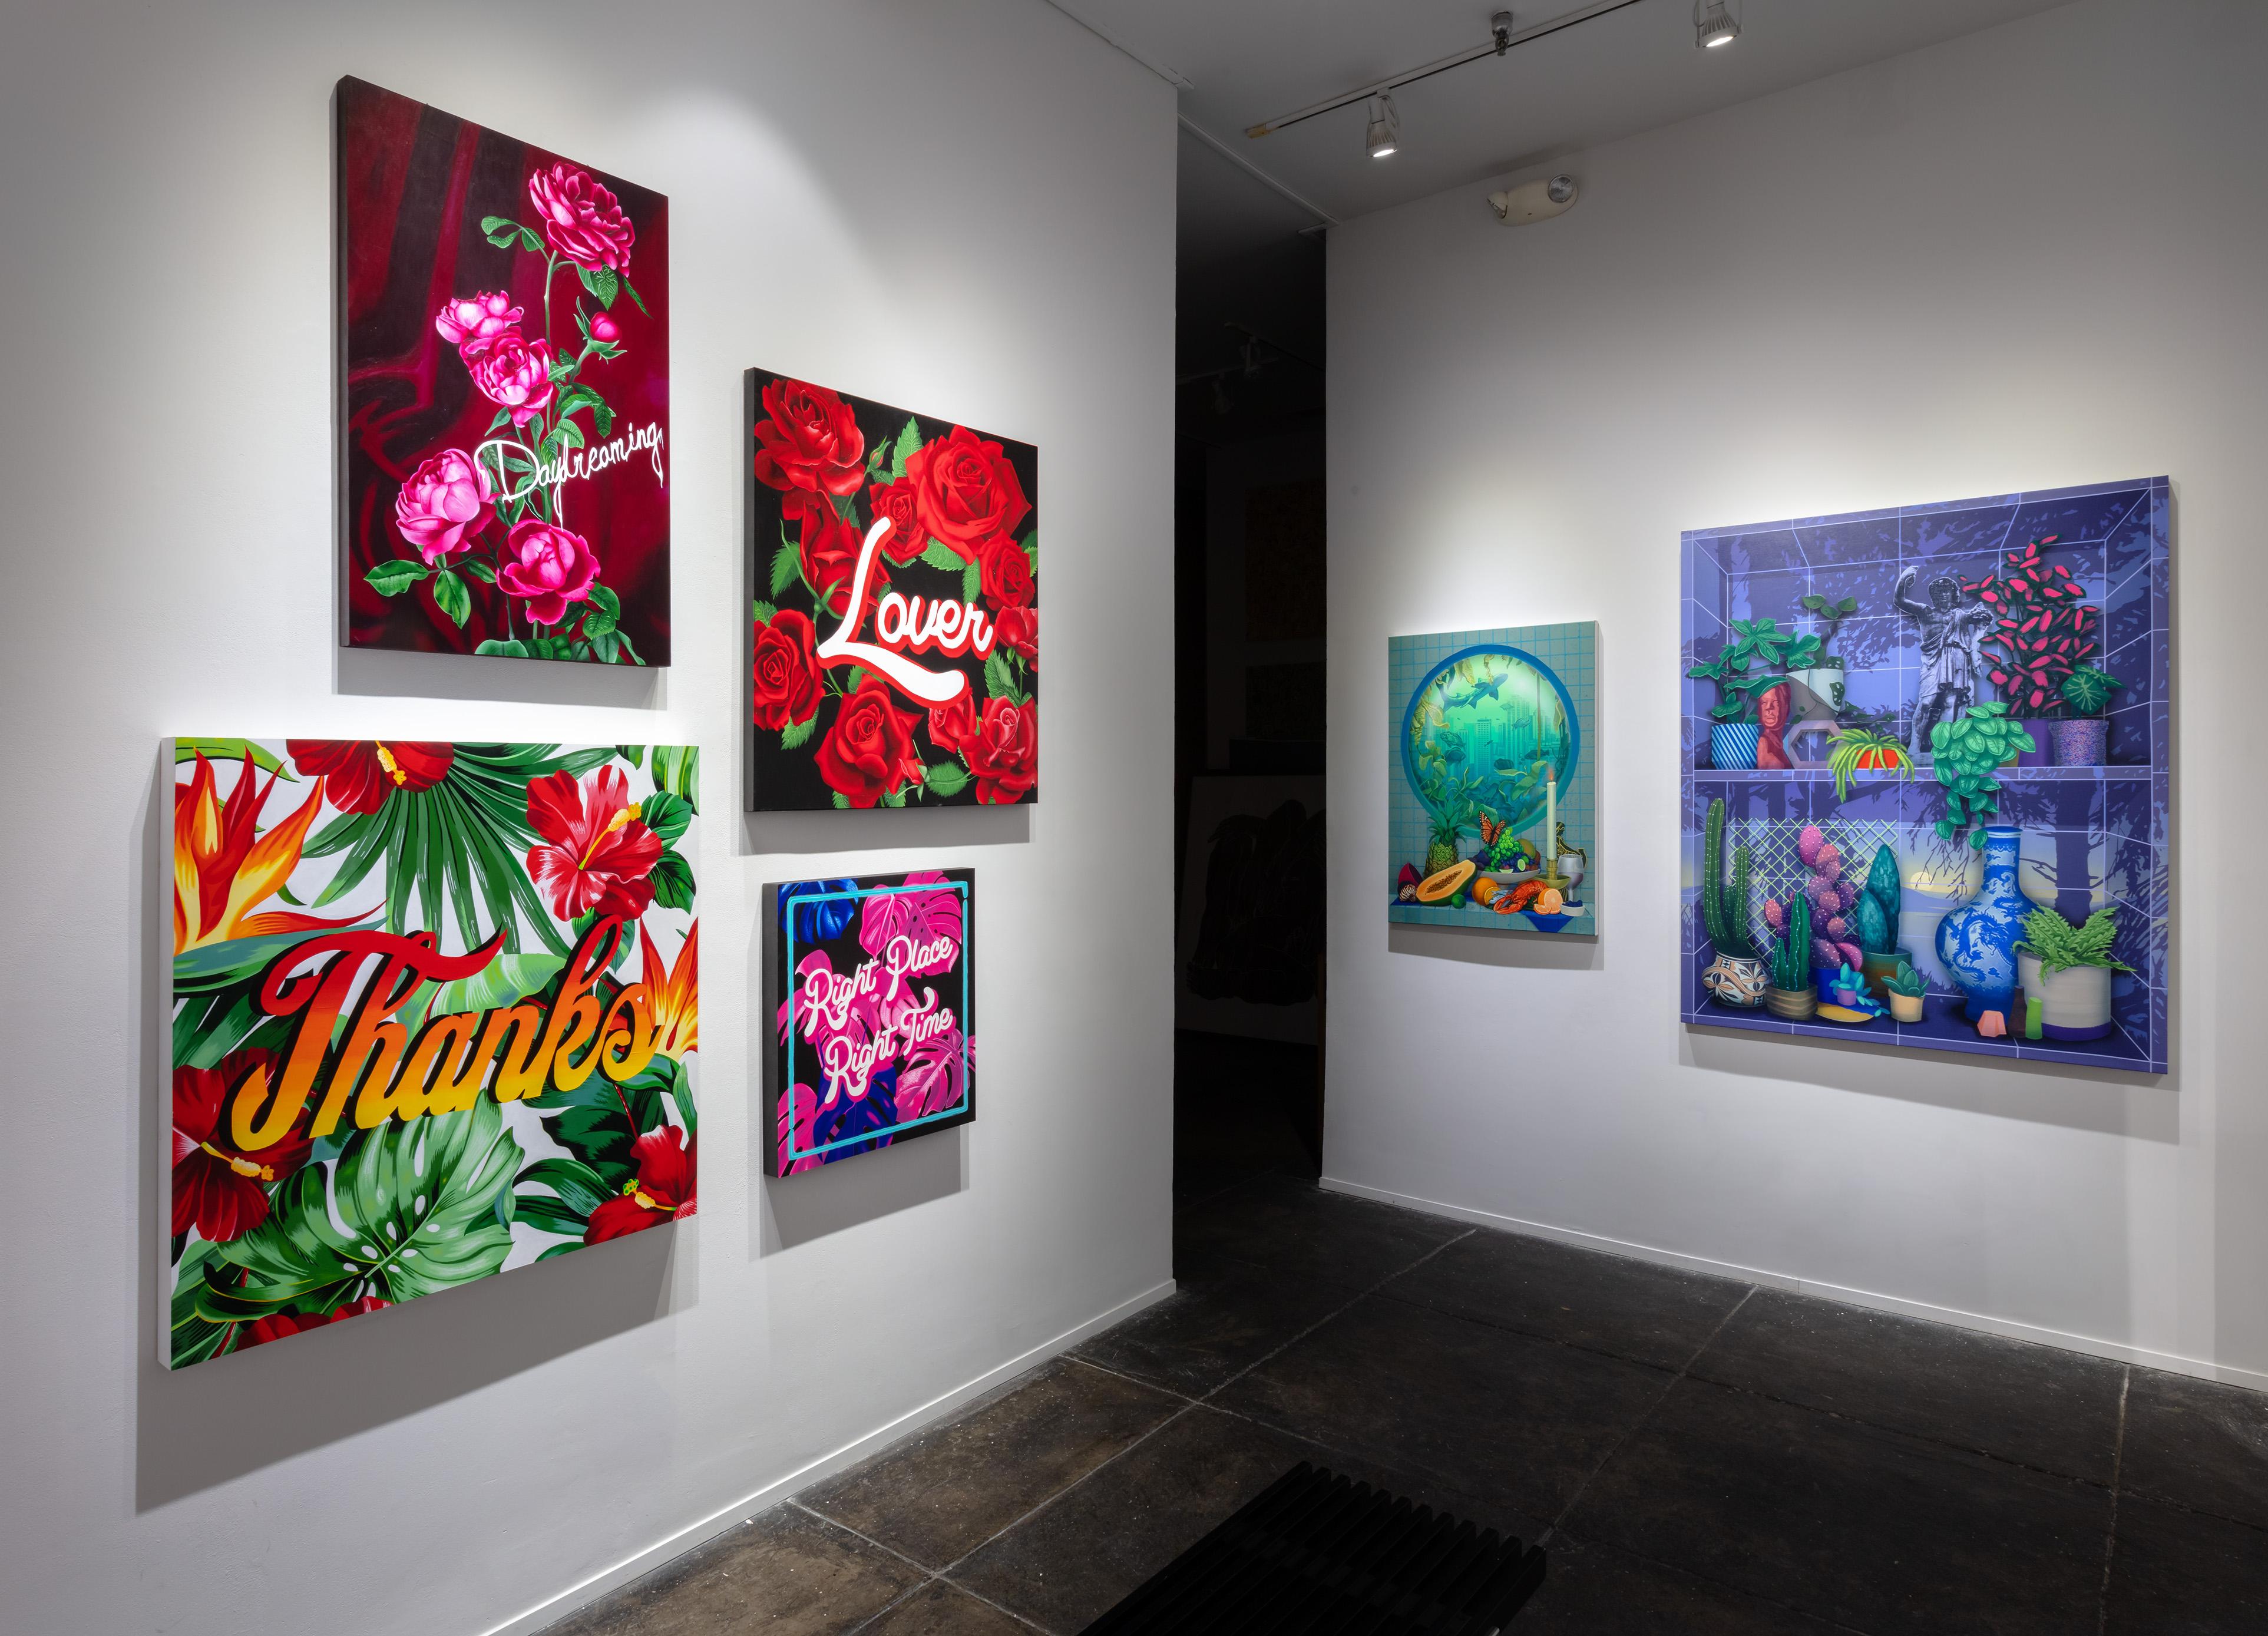 Diana Georgie is known for her text based works that are usually in vibrant and extravagant settings often referencing pop culture and contemporary iconography. Georgie works predominantly in the painted medium, often combining floral elements in a